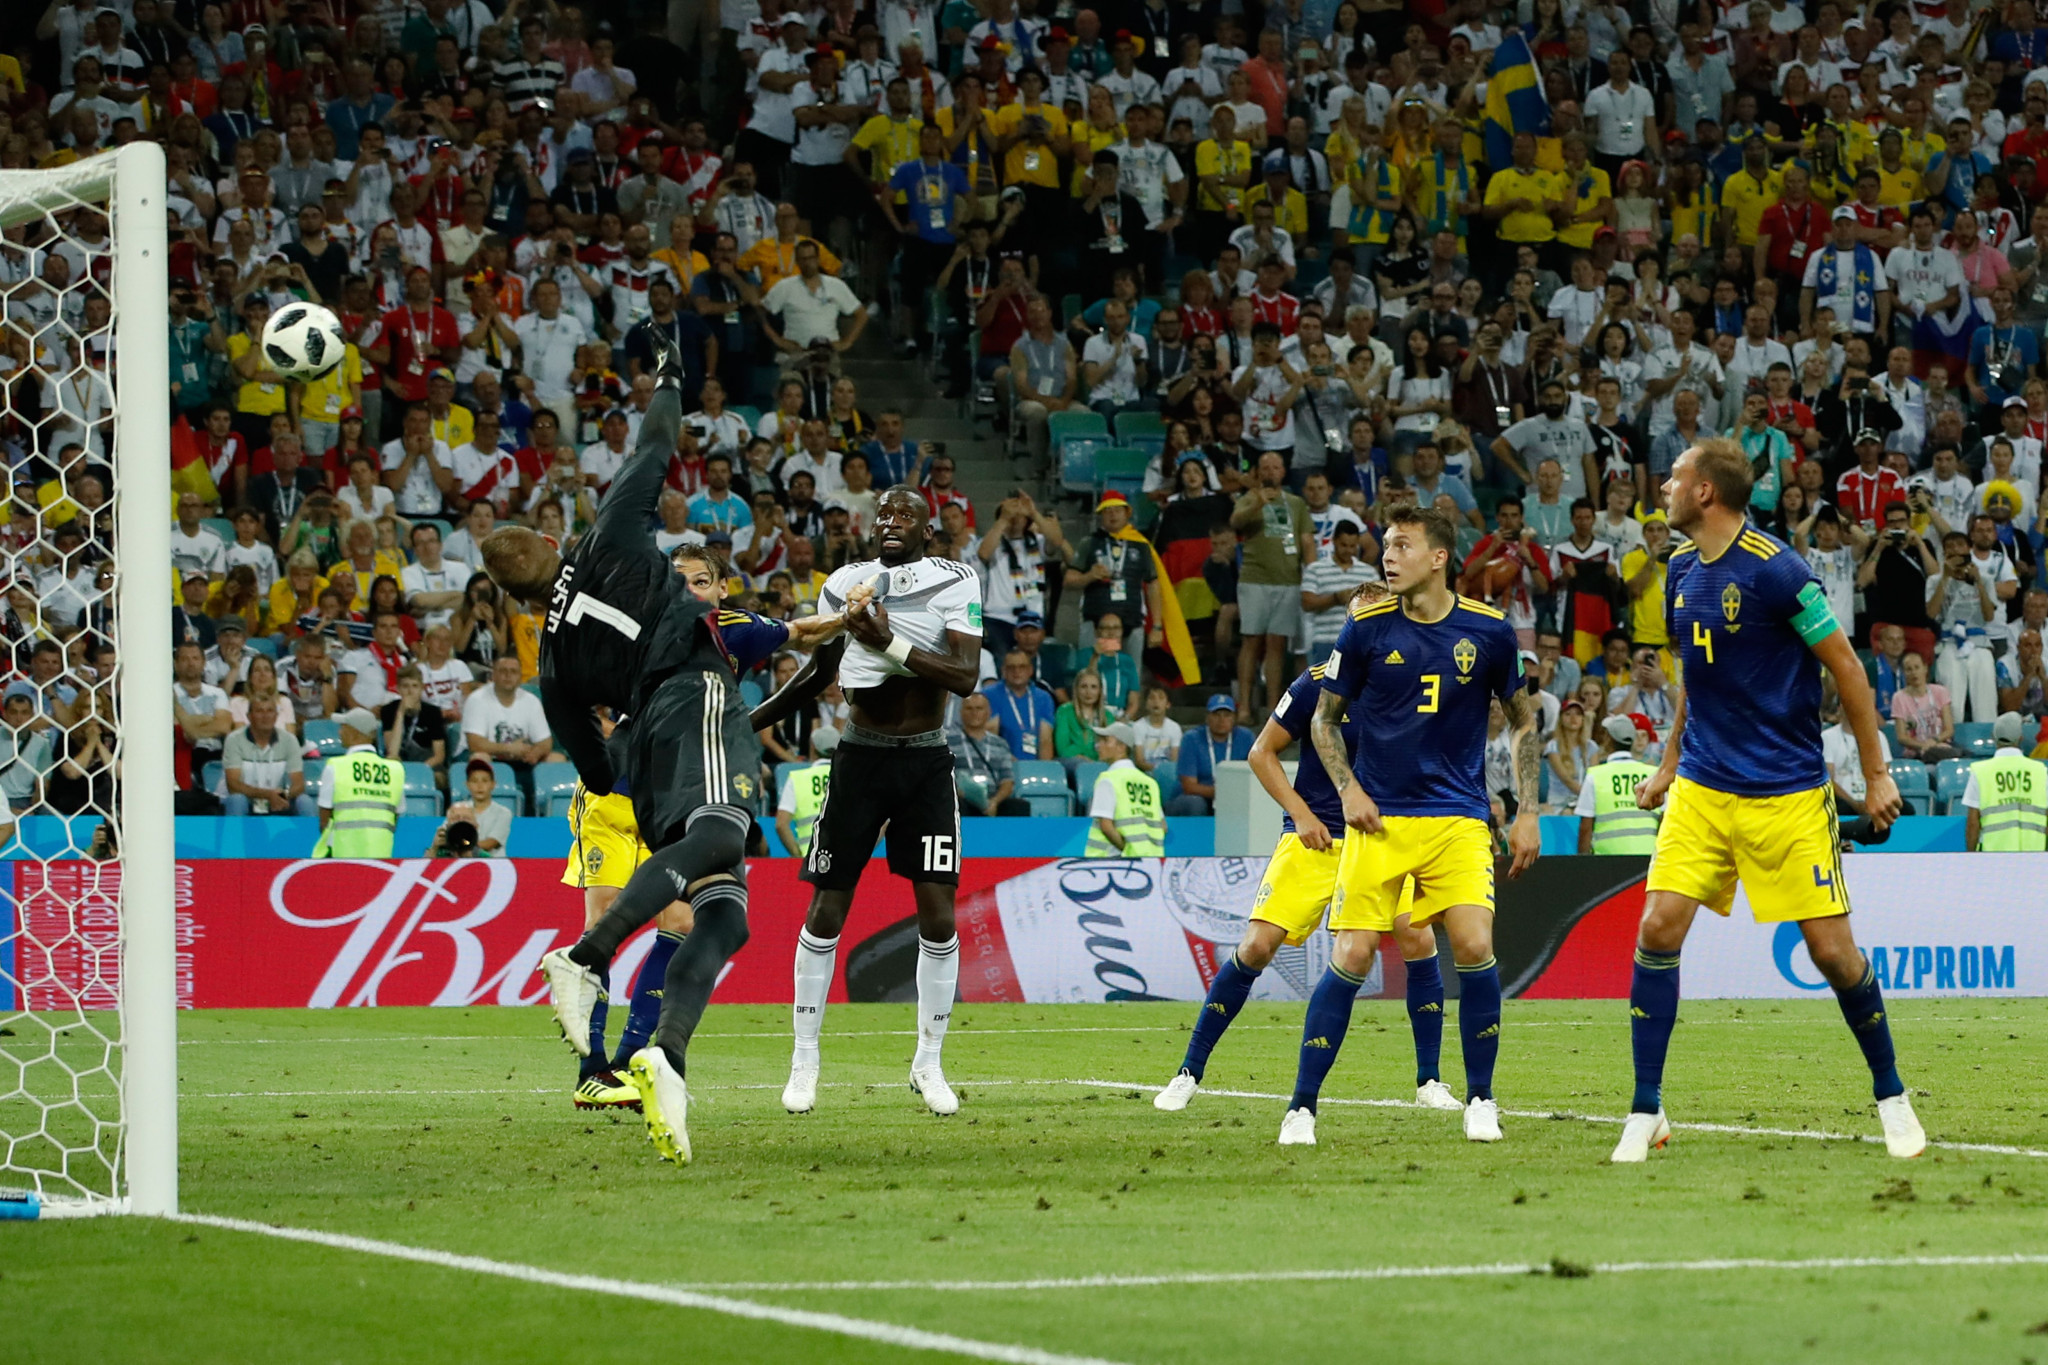 German team officials fined and warned for sparking touchline row in FIFA World Cup win over Sweden